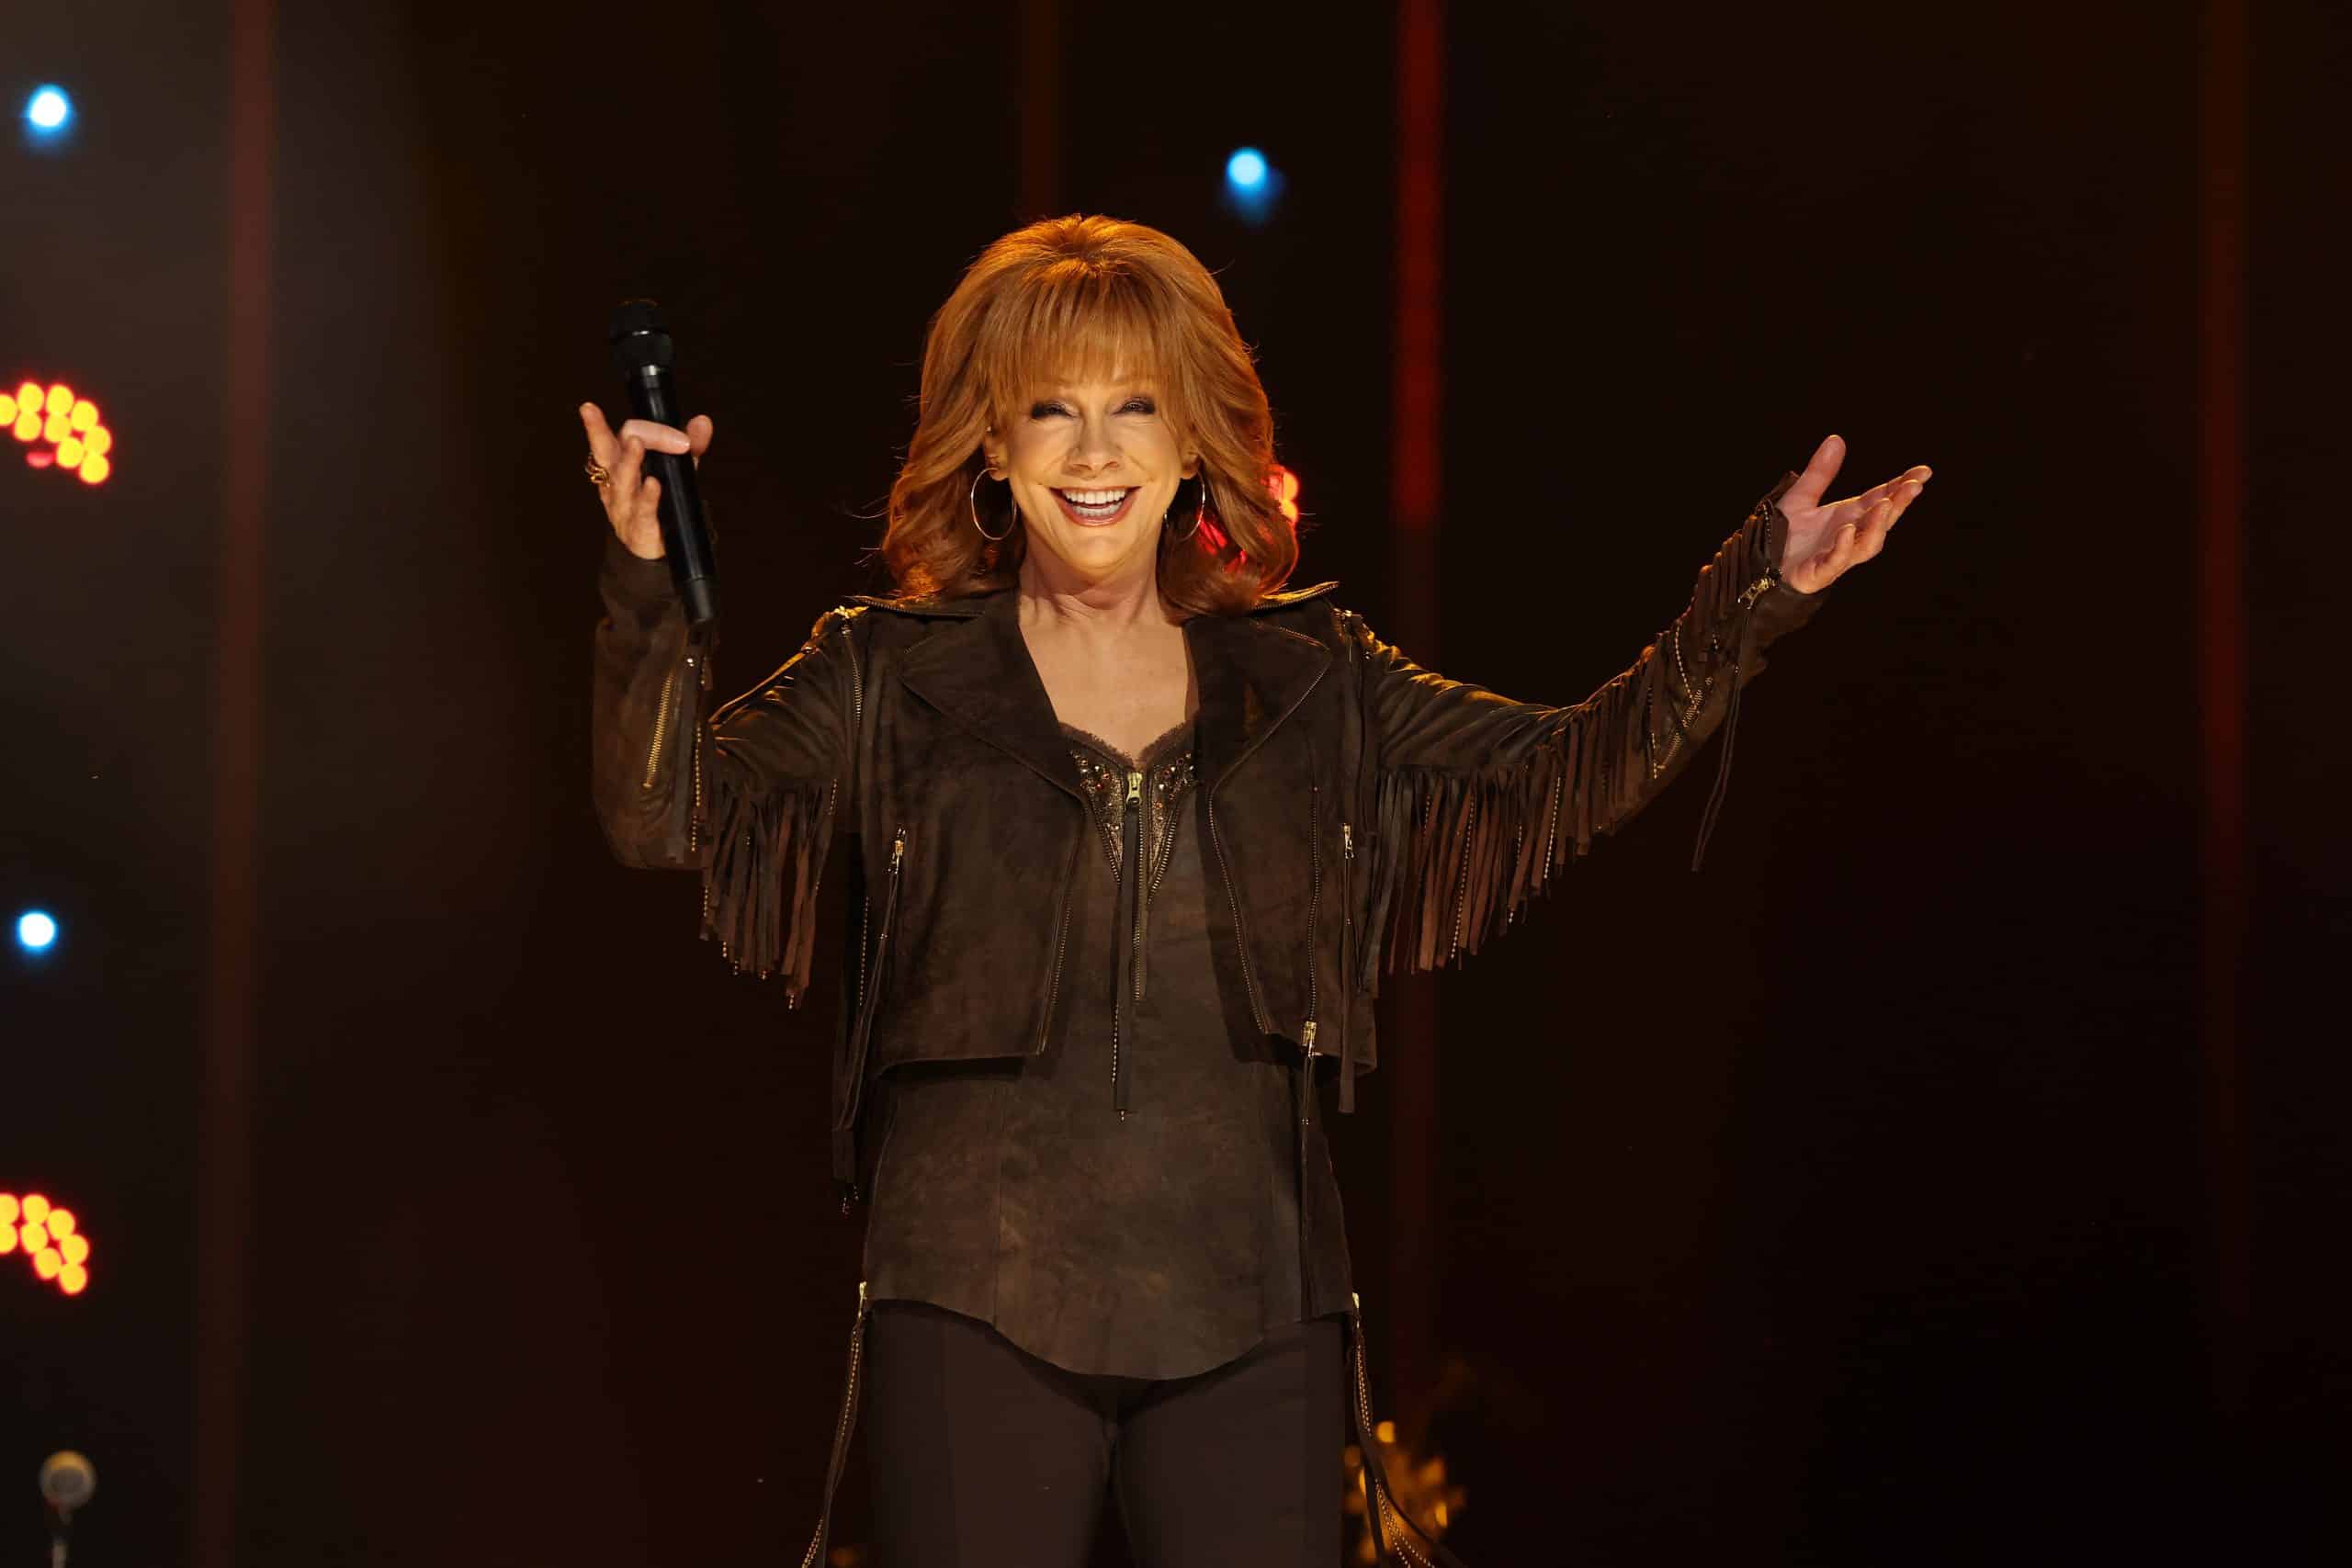 Learn 7 unique things about Reba McEntire